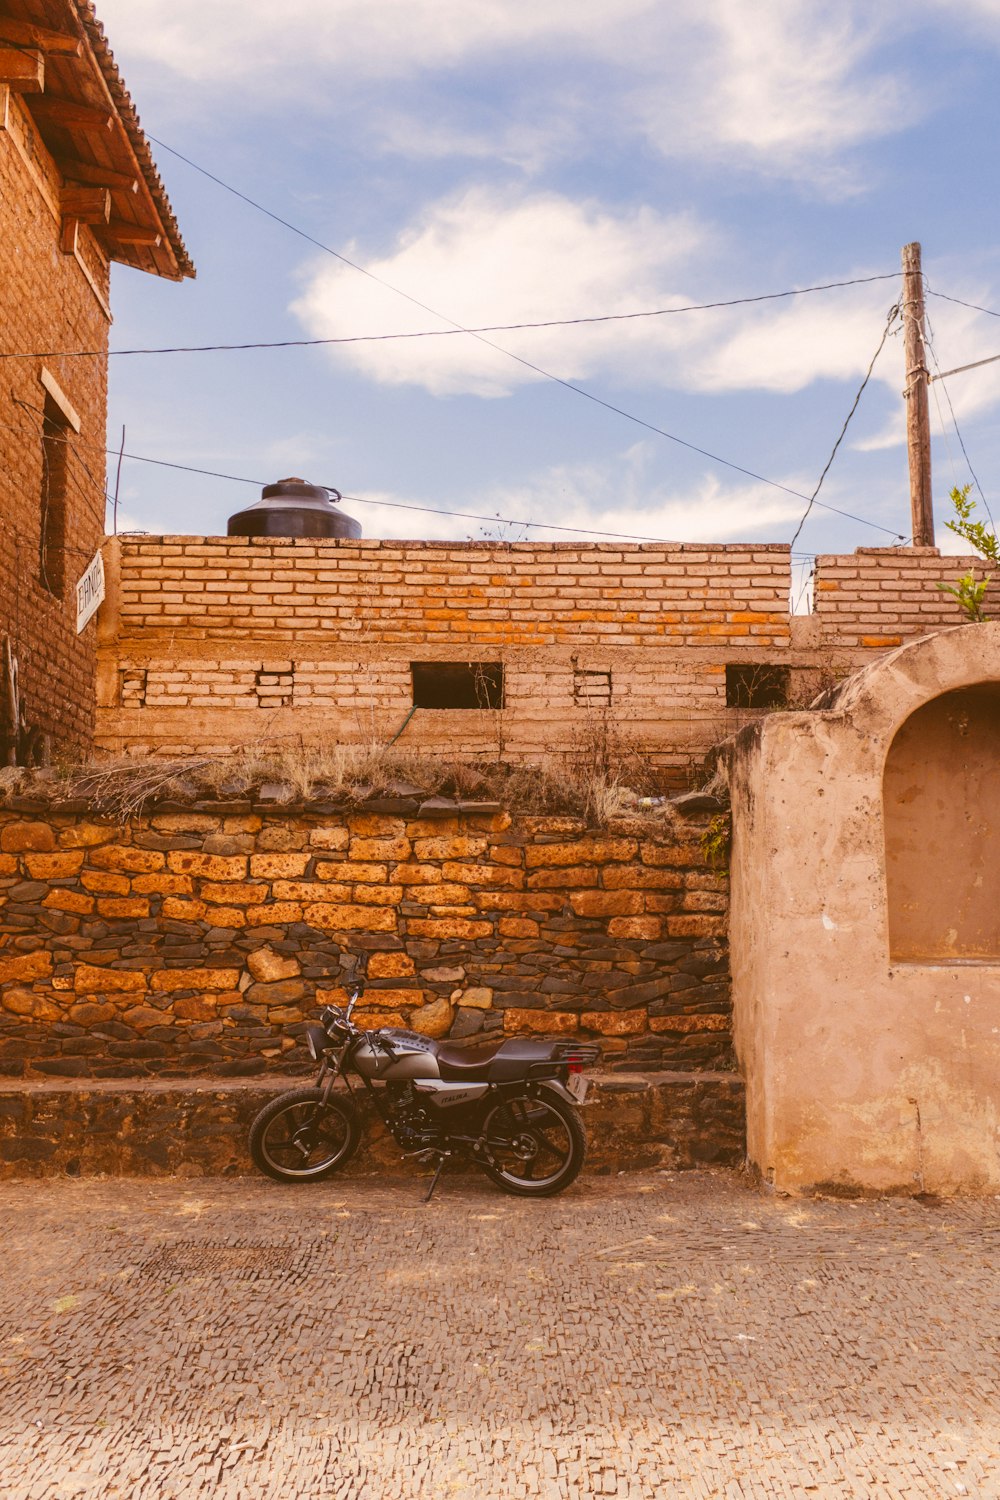 a motorcycle parked in front of a brick building